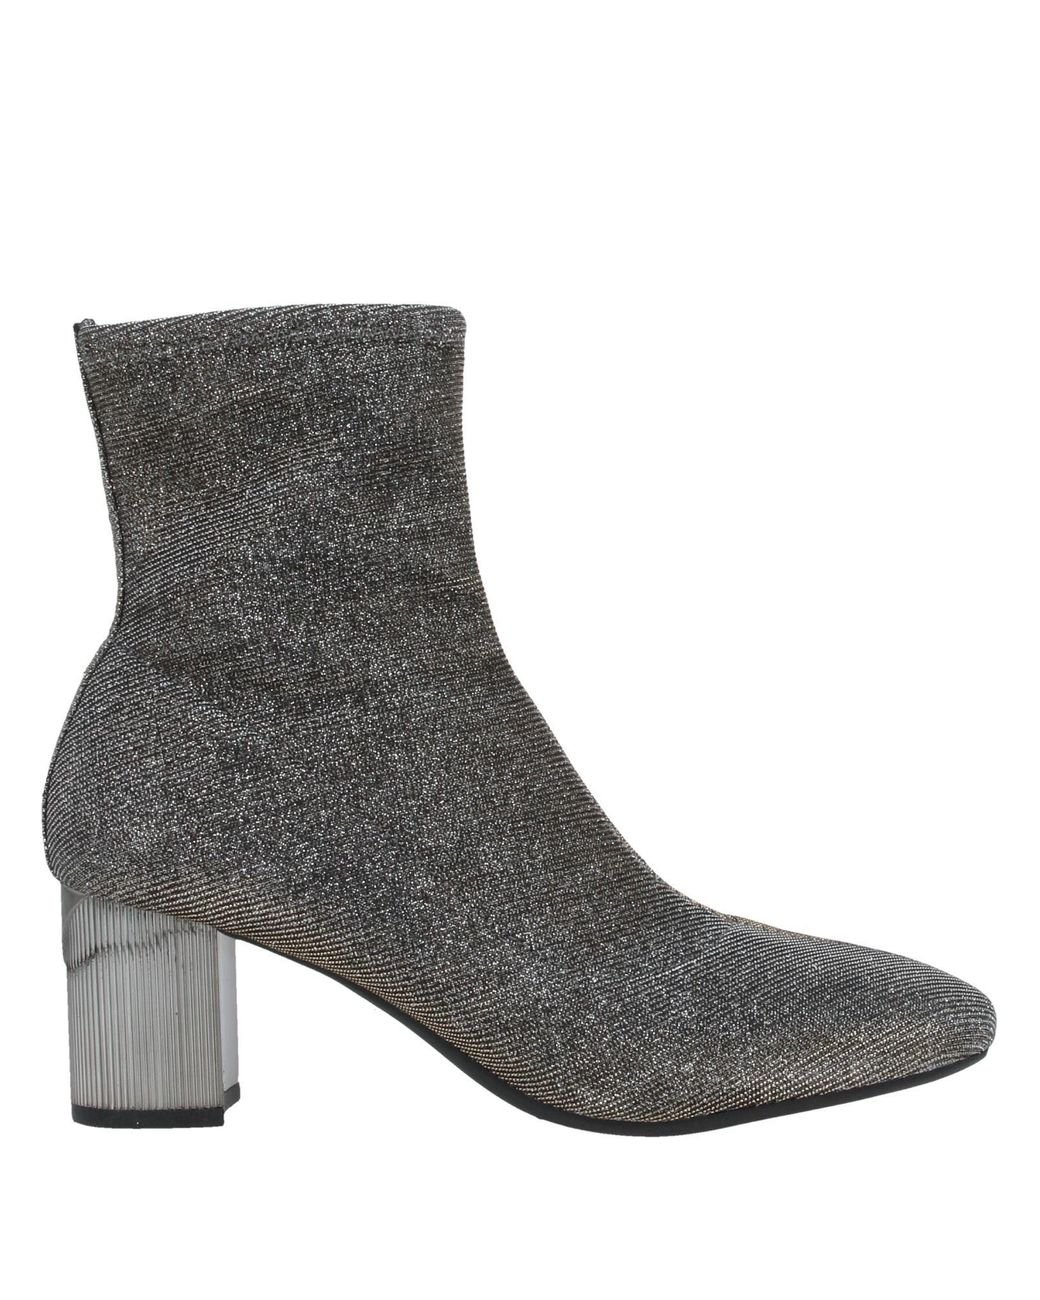 MICHAEL Michael Kors Leather Ankle Boots in Gold (Metallic) - Lyst